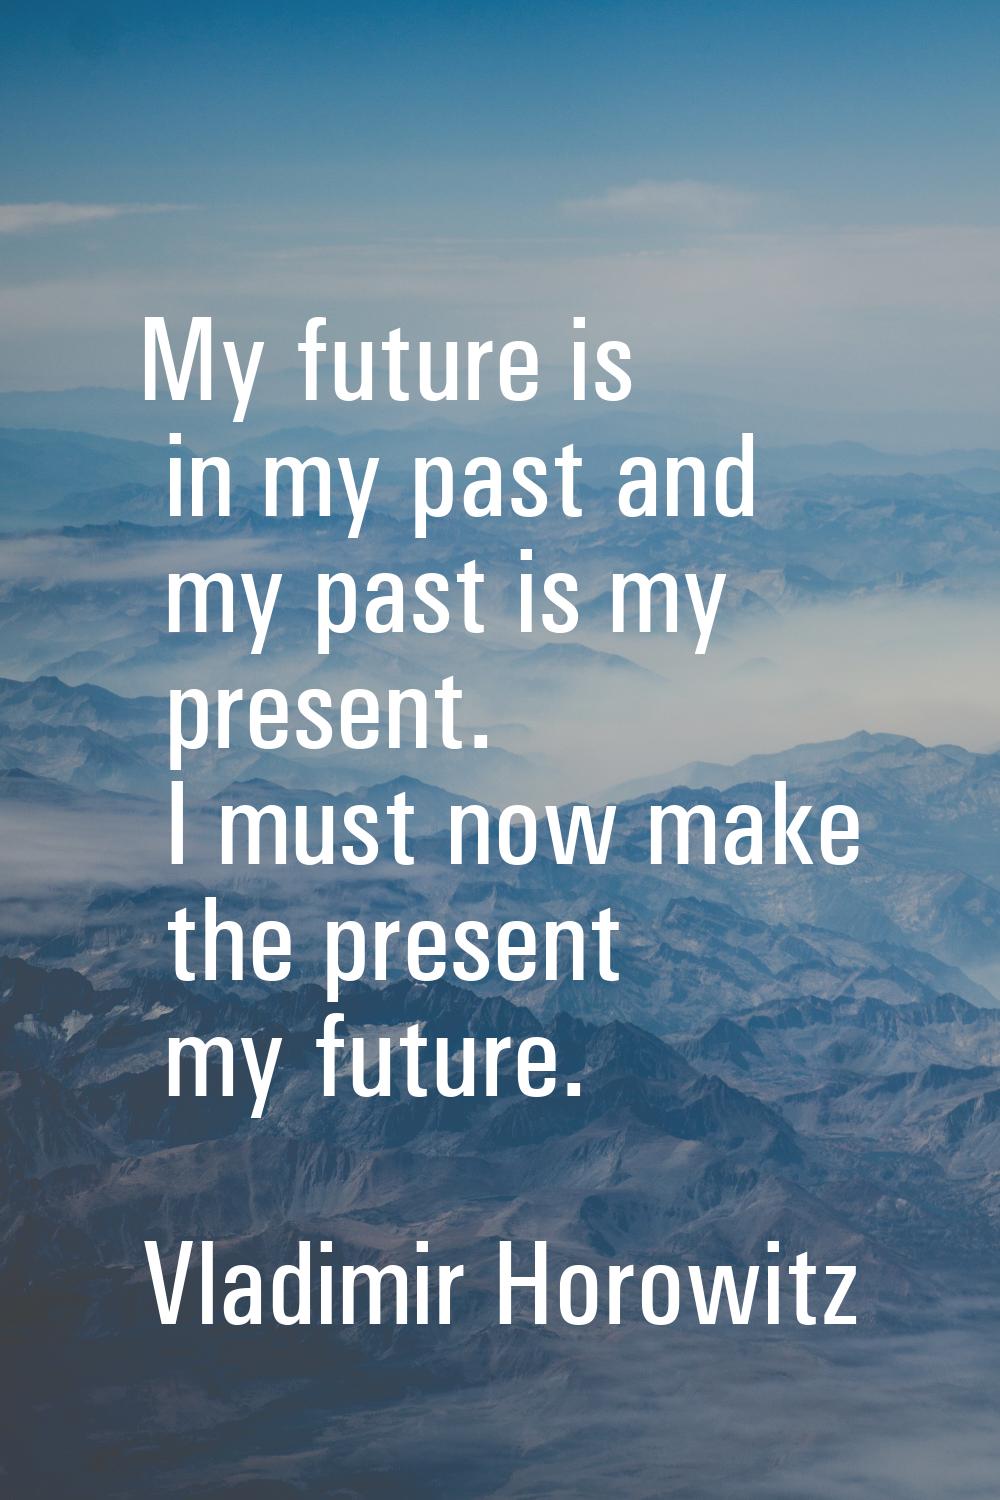 My future is in my past and my past is my present. I must now make the present my future.